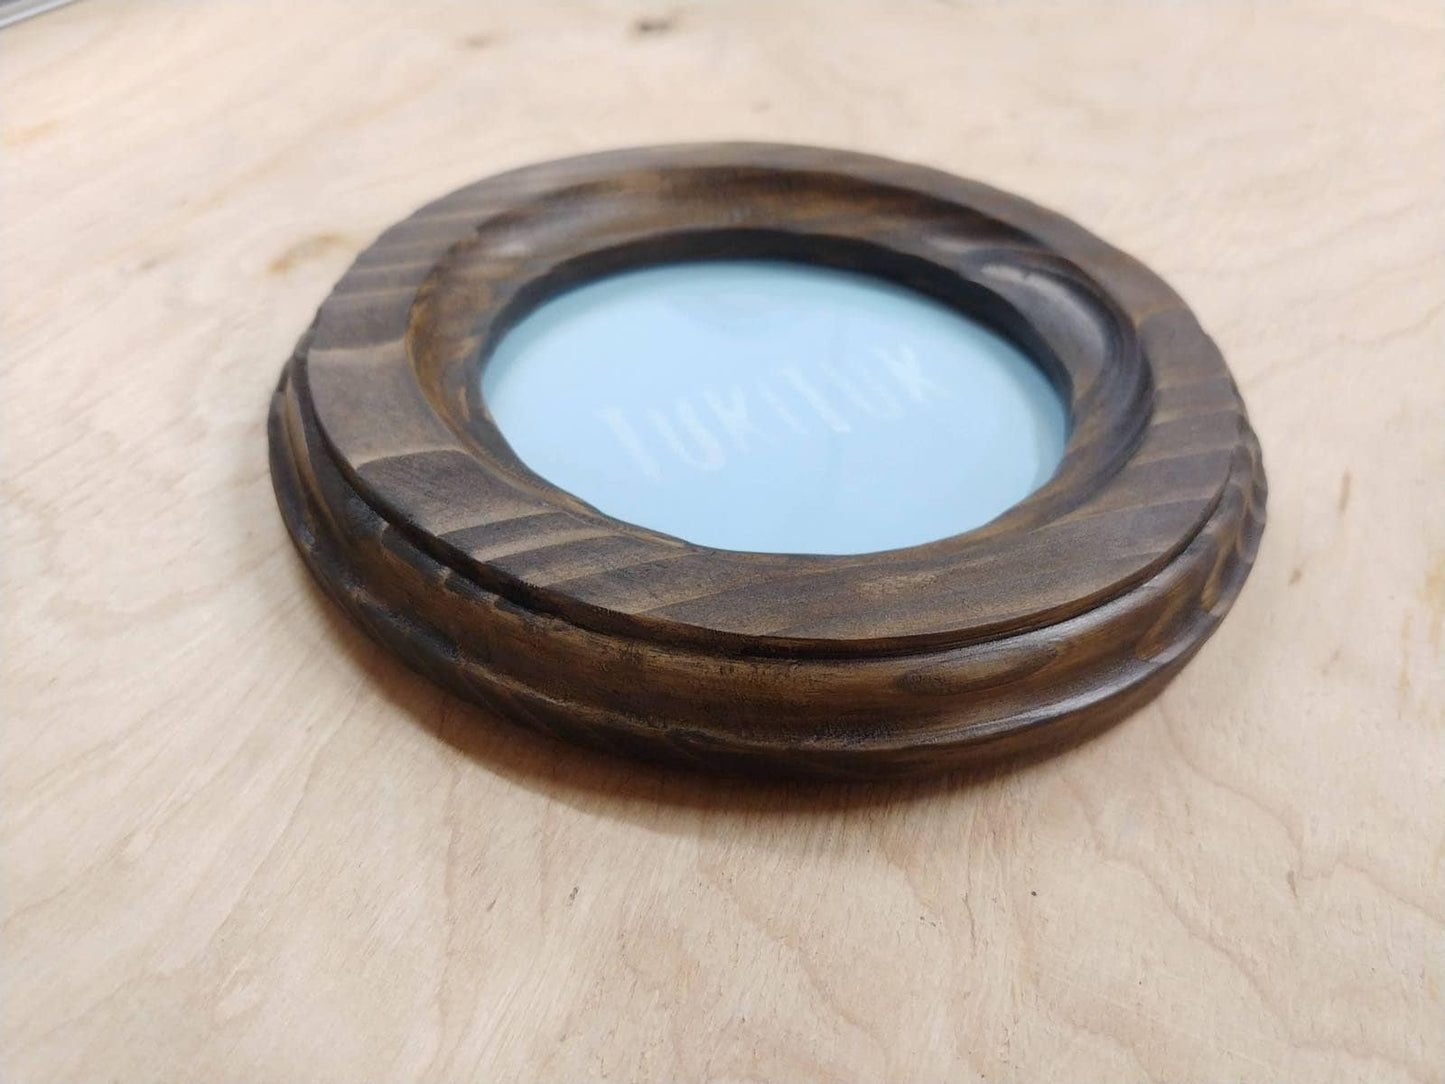 Handcrafted round frame, Wooden picture frame, Frame for wall, Wood frame home decor, Hallway rustic frame, Living room circle frame "Rouen"